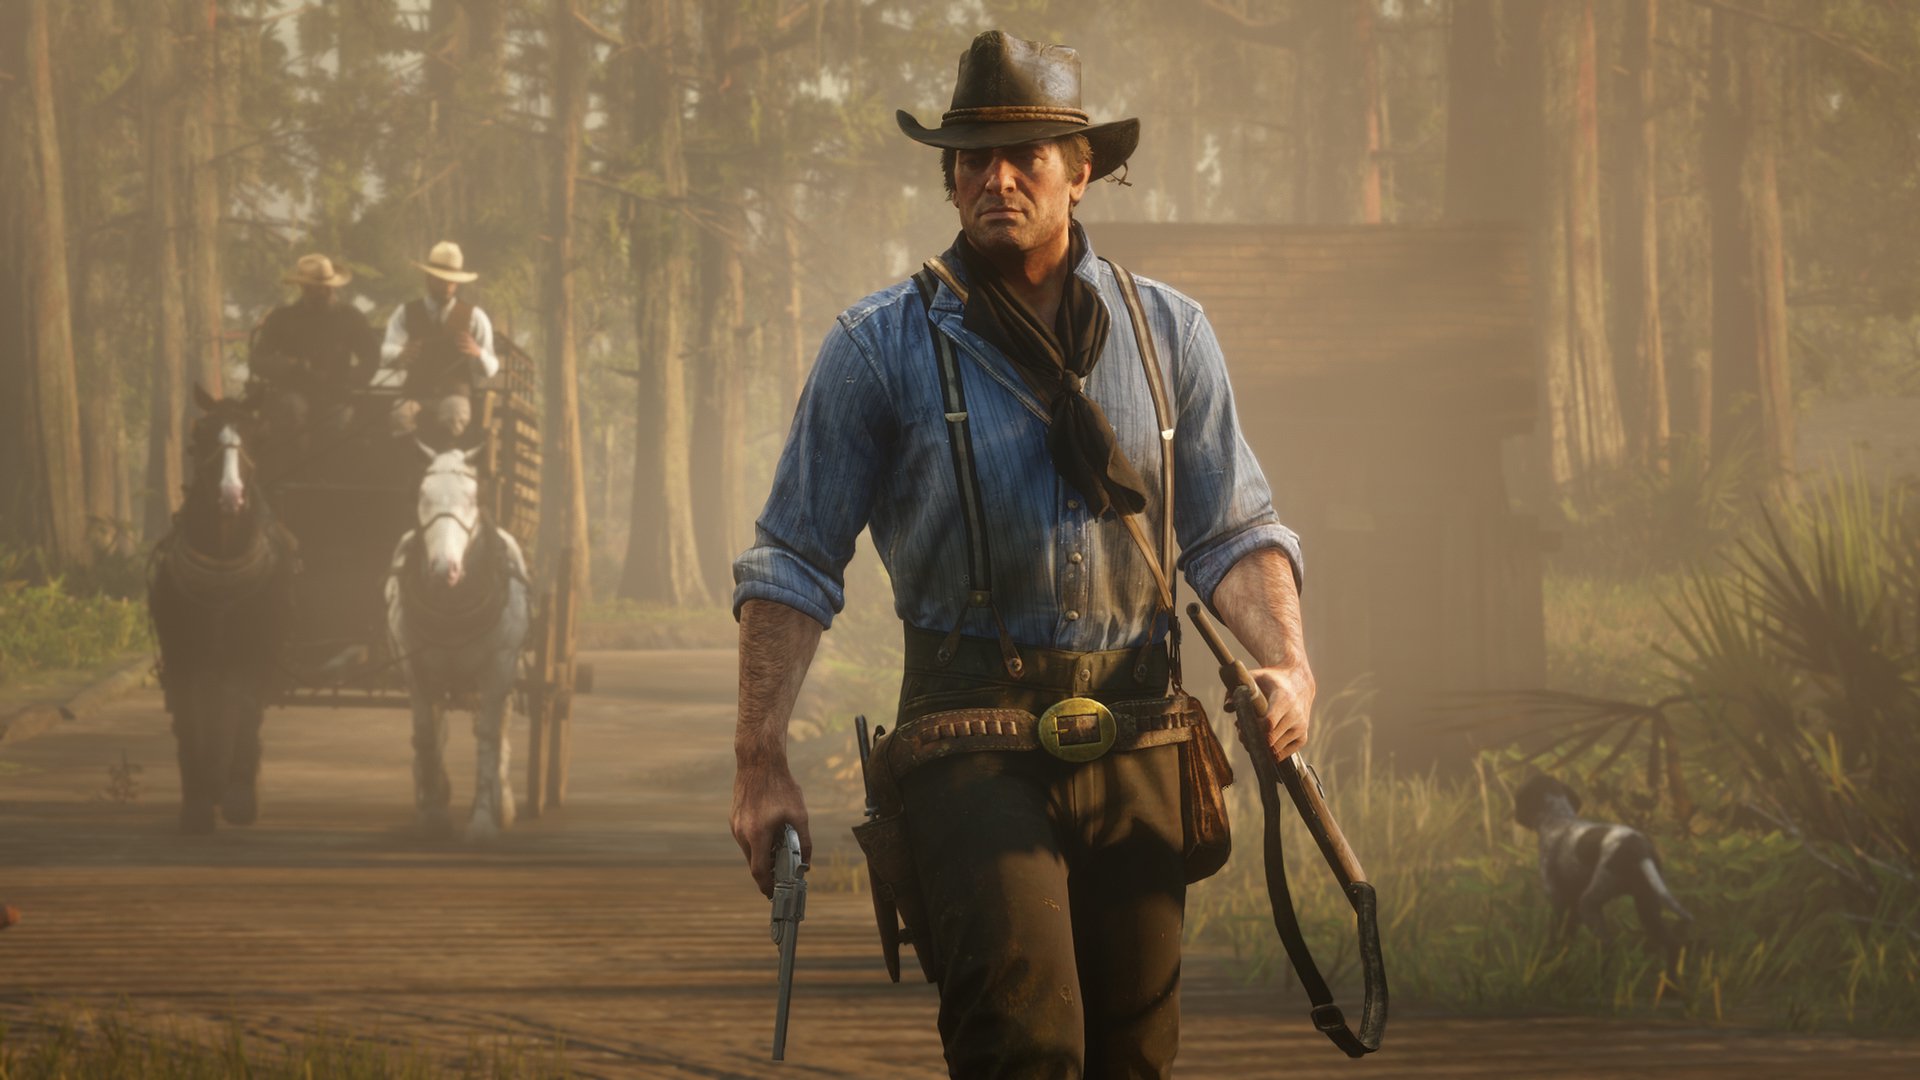 Red Dead Redemption 2 [Social Club]